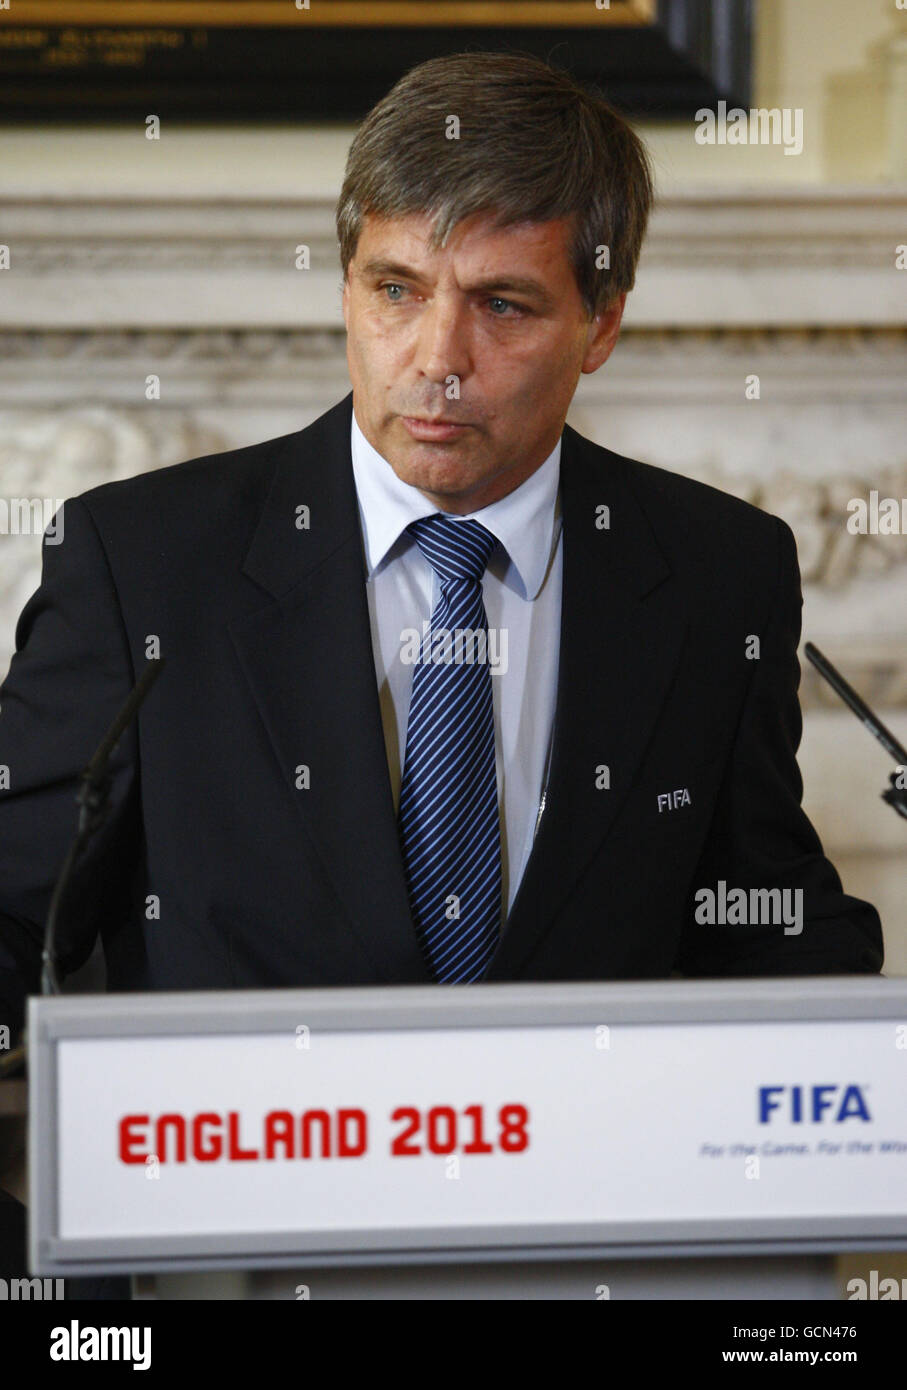 Leader of the FIFA inspection team Harold Mayne Nicholls during a football World Cup 2018 bid event at Number 10, Downing Street in London. Stock Photo